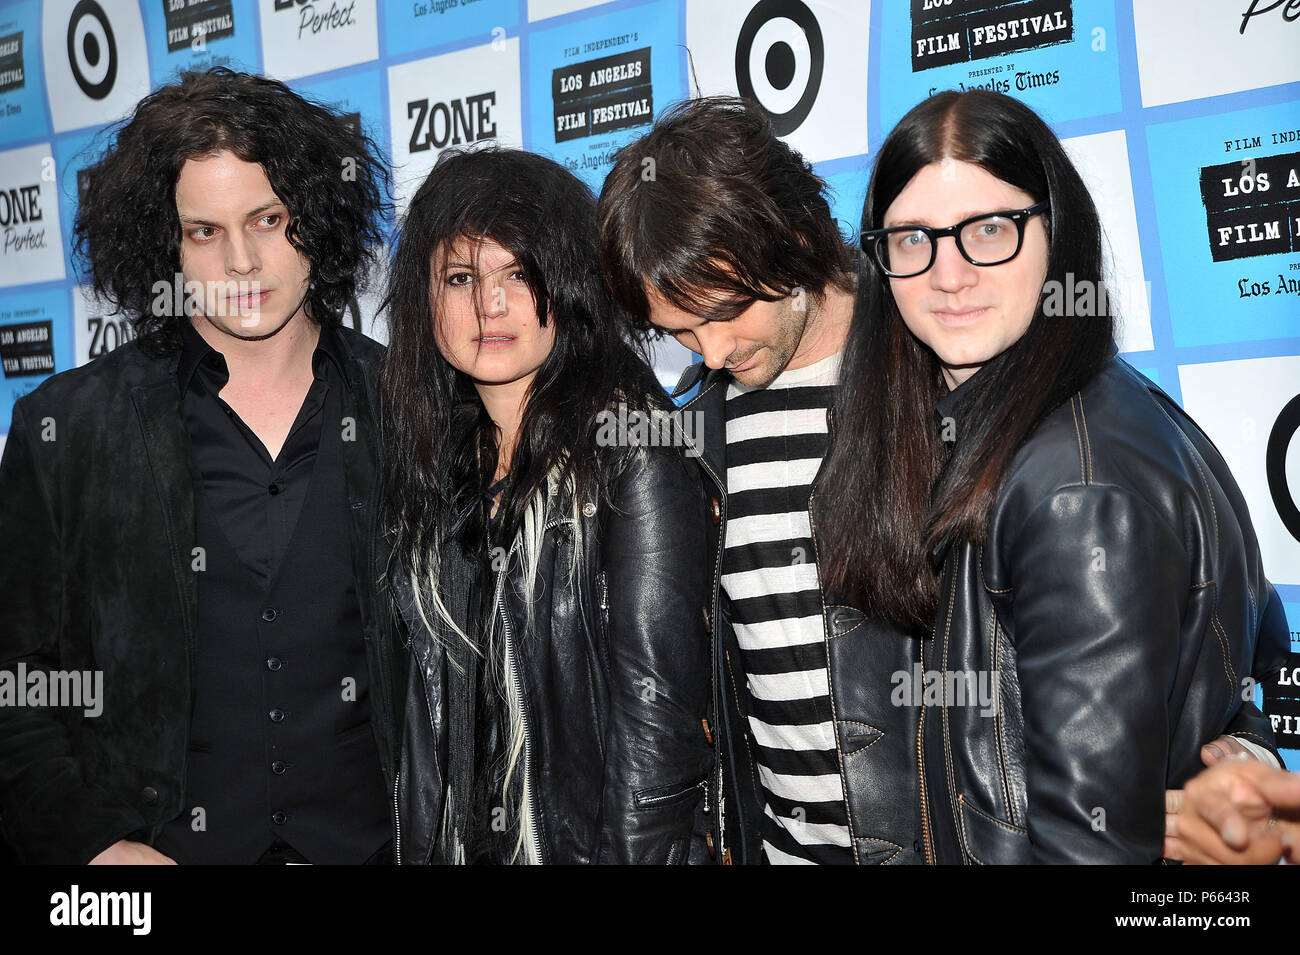 Jack White, Alison Mosshart ( of The Kills ), Dean Fertita ( of the Queens of Stone Age ), Jack lawrence ( of the Raconteurs )- It May Get loud Premiere at the LA Film Festival at the Man Festival Theatre In Los Angeles.          -            TheDeadWeather 20.jpgTheDeadWeather 20  Event in Hollywood Life - California, Red Carpet Event, USA, Film Industry, Celebrities, Photography, Bestof, Arts Culture and Entertainment, Topix Celebrities fashion, Best of, Hollywood Life, Event in Hollywood Life - California, Red Carpet and backstage, ,Arts Culture and Entertainment, Photography,    inquiry ts Stock Photo